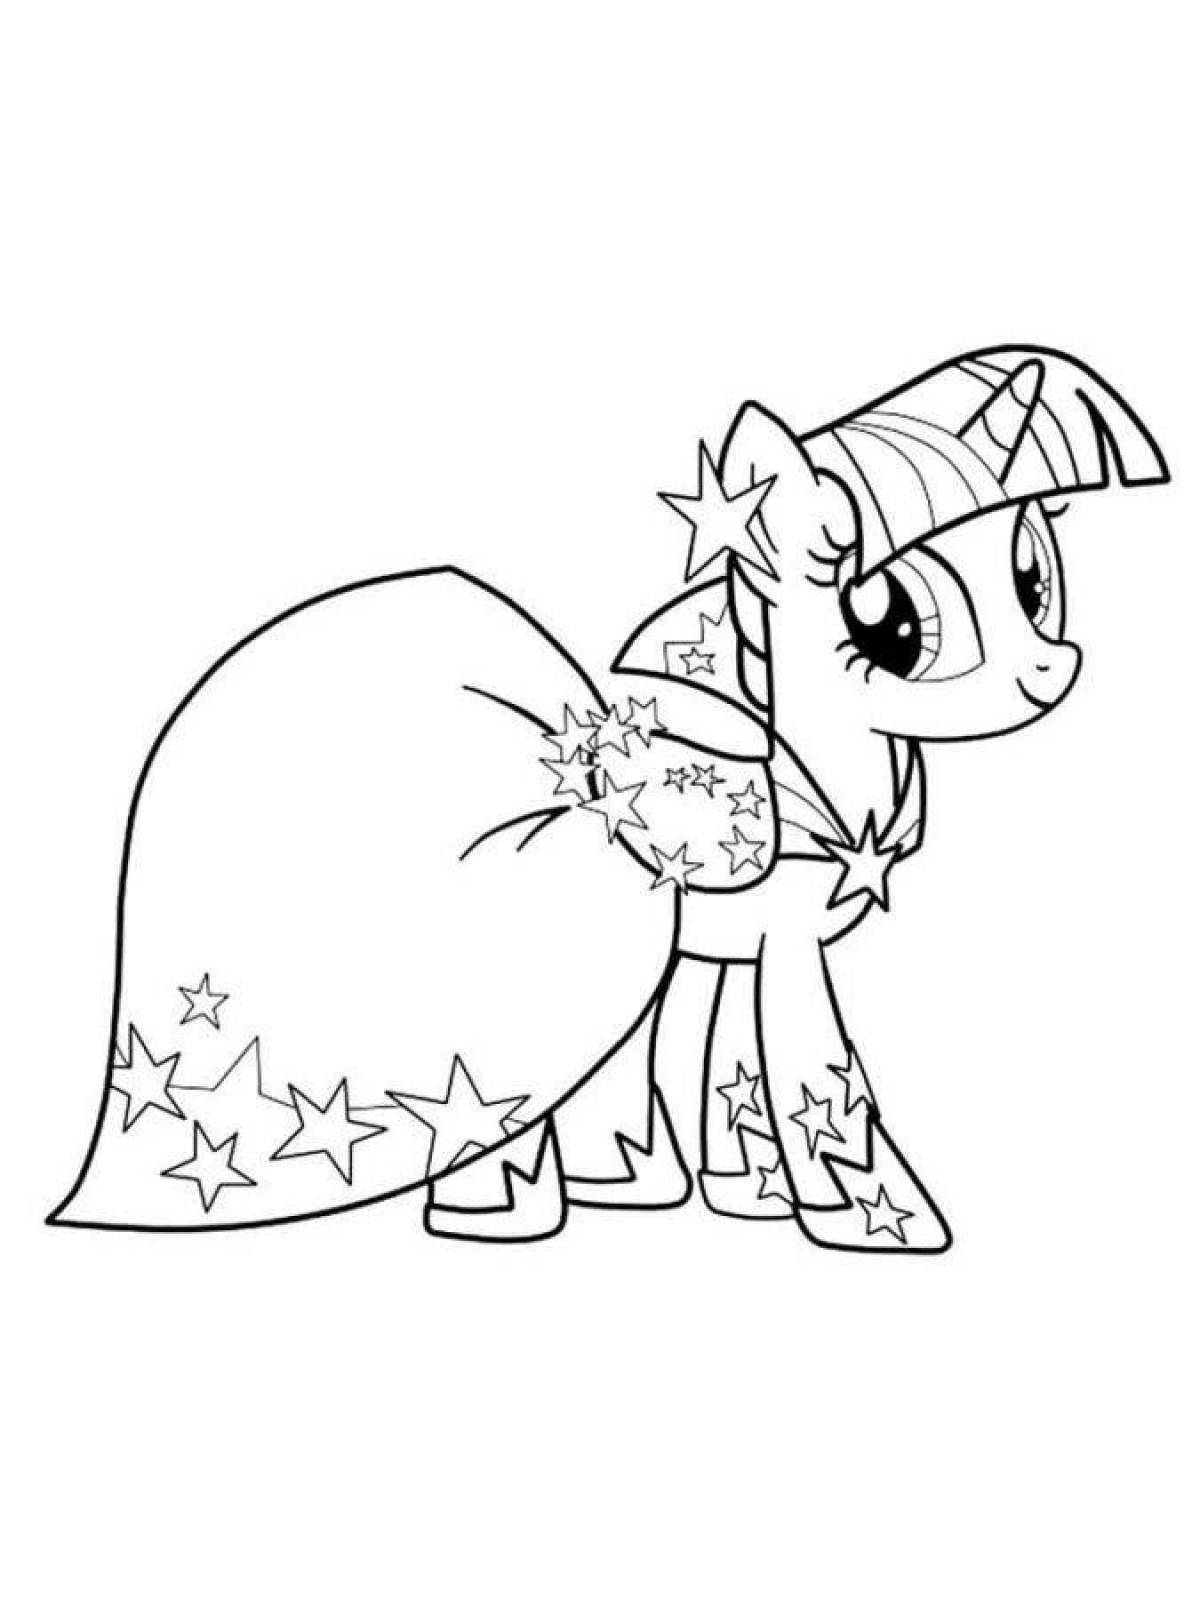 Amazing Twilight Sparkle Coloring Page